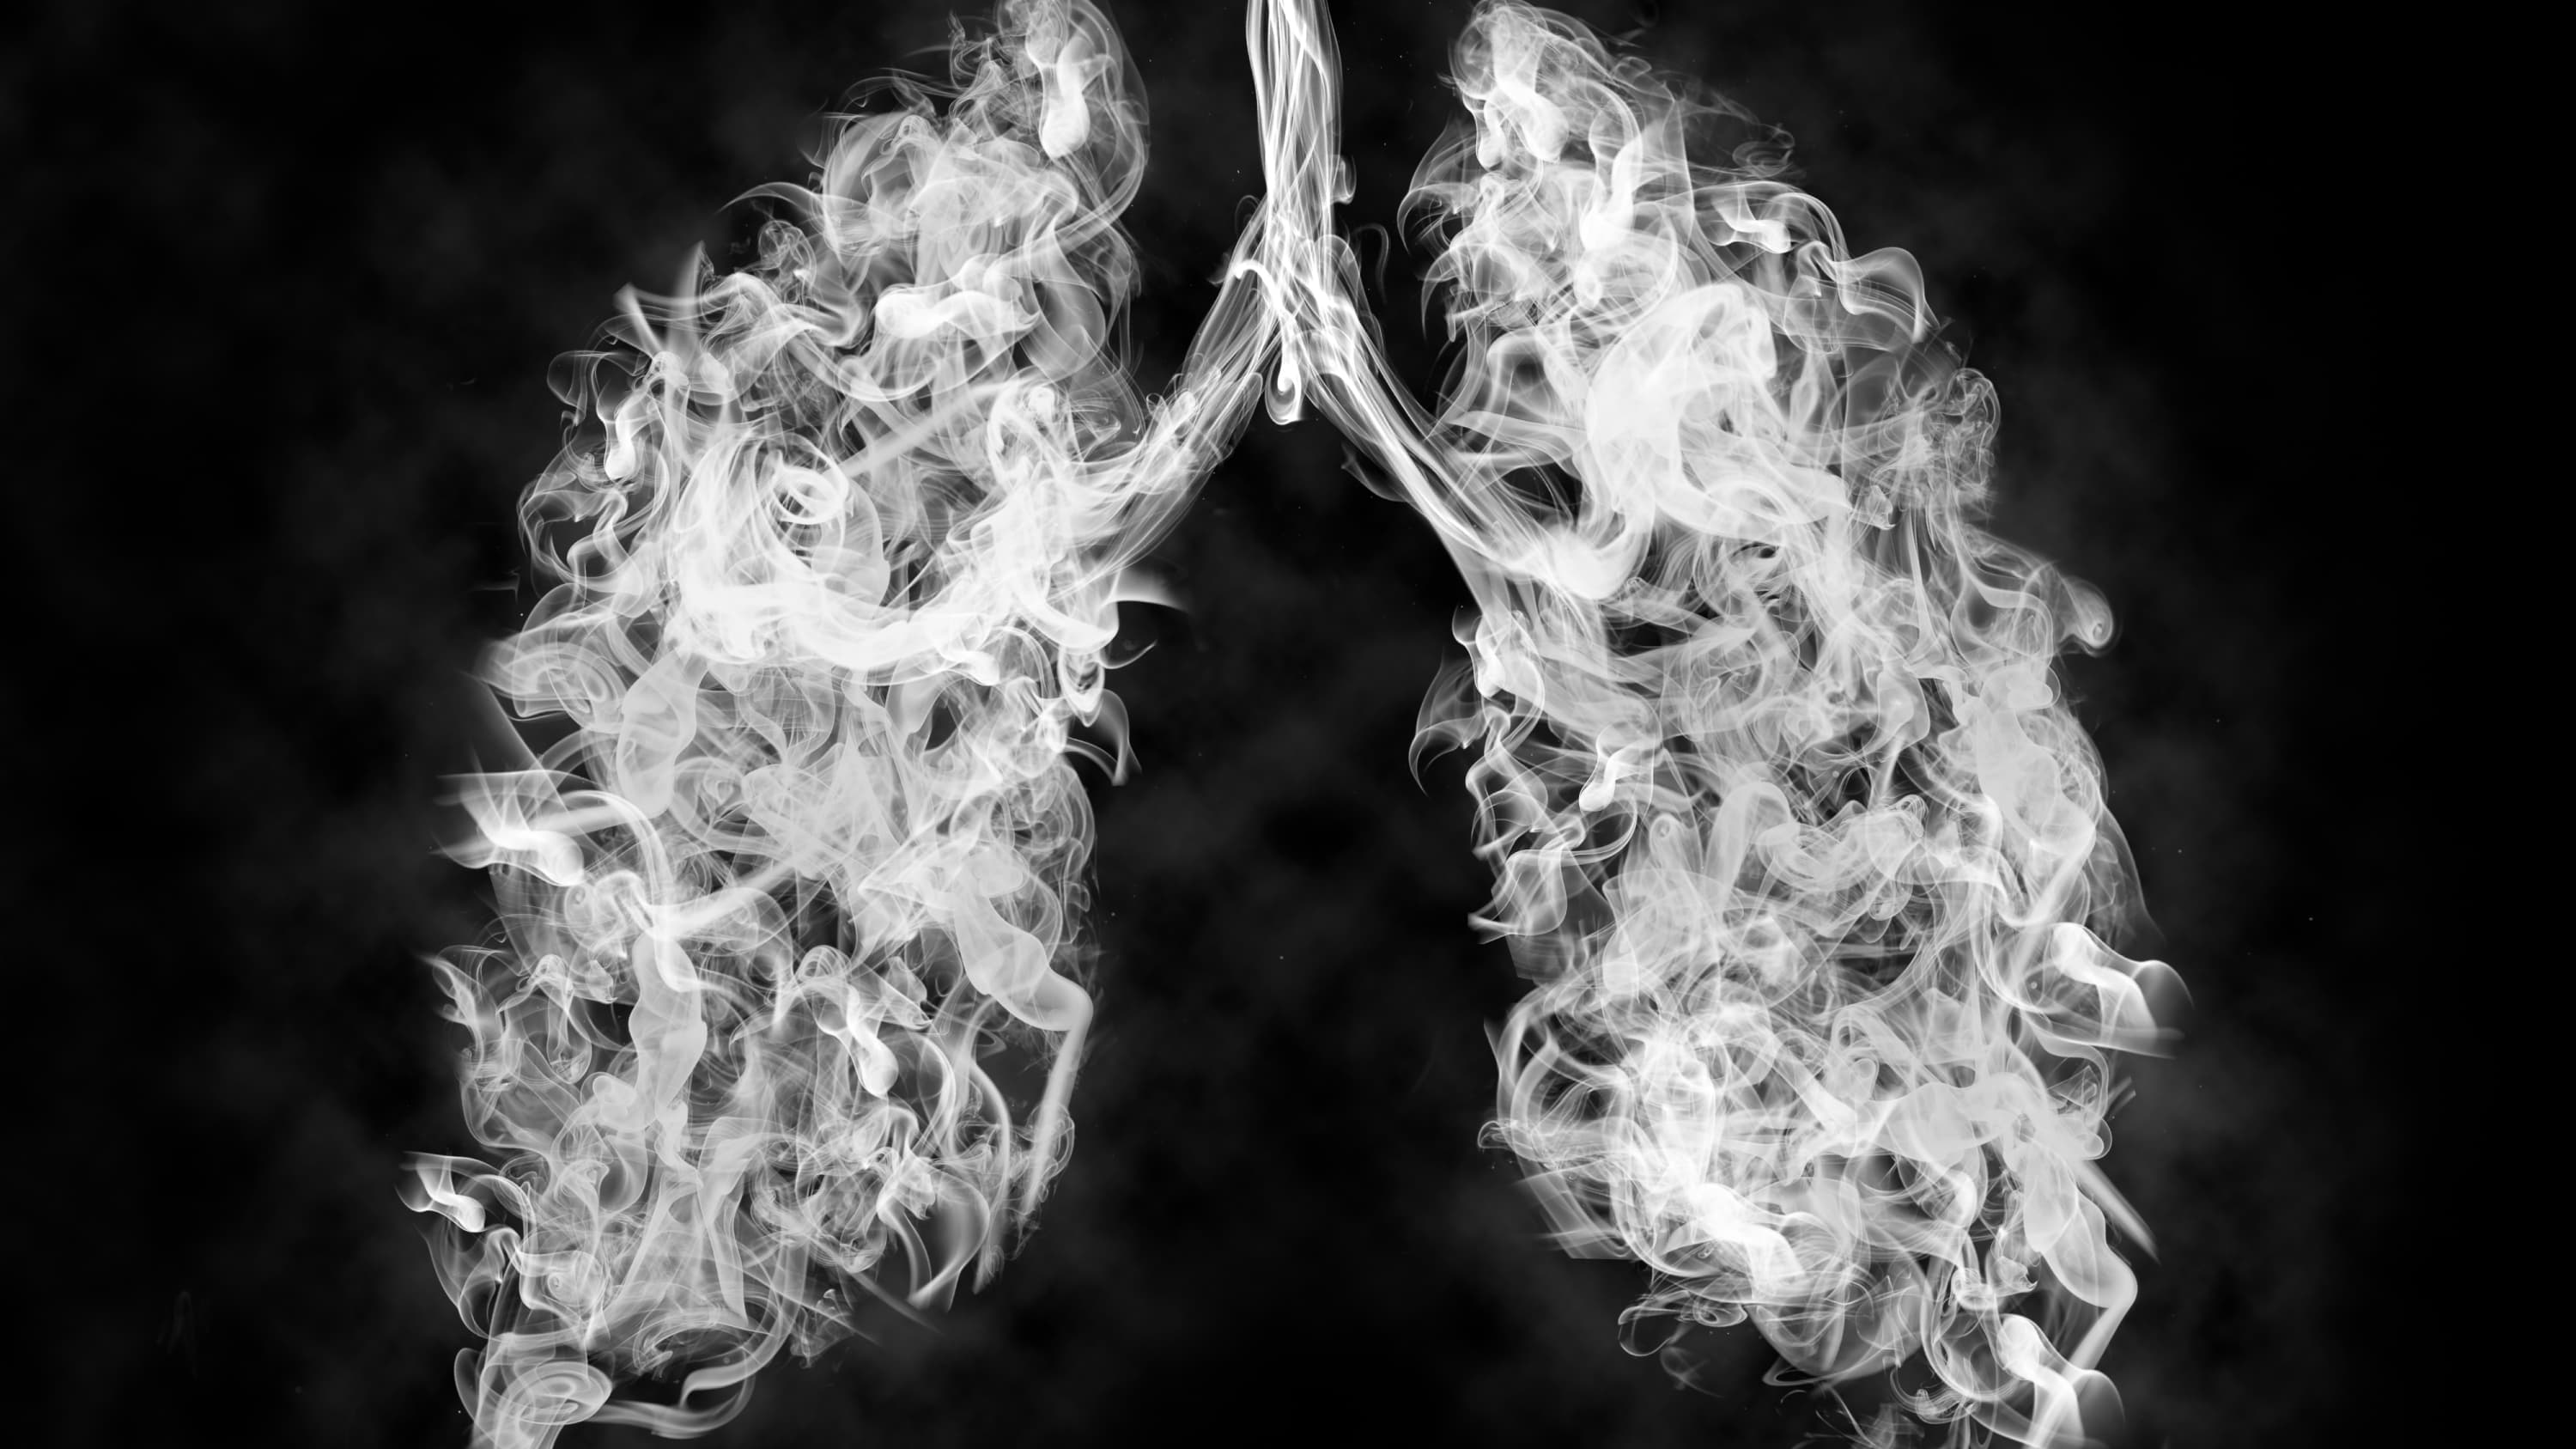 Illustration of smoke in lungs, representing the dangers of vaping